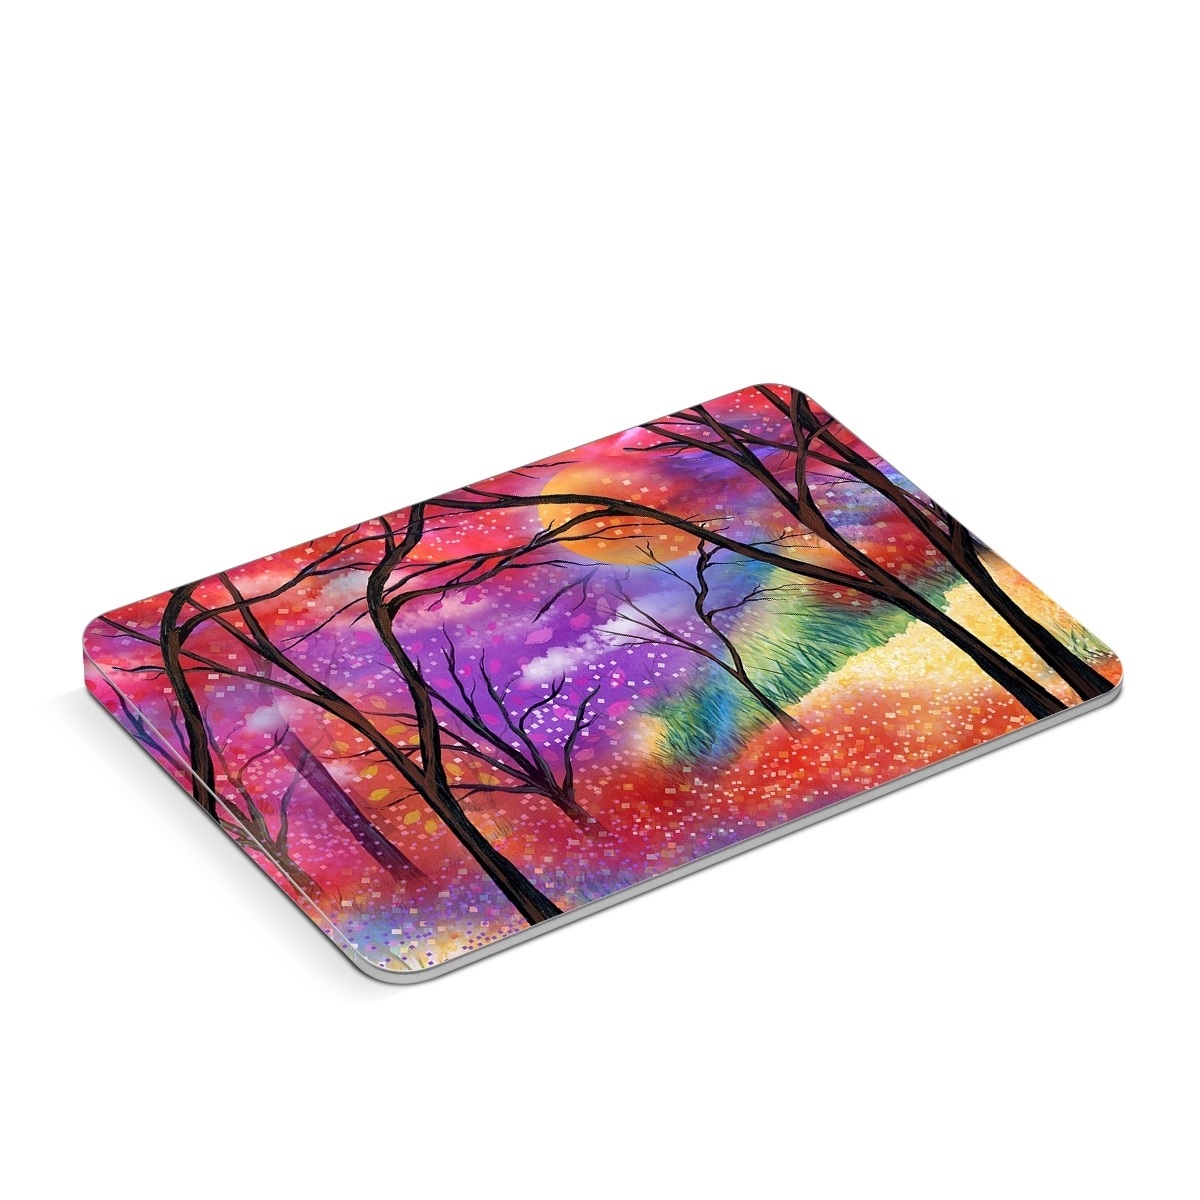 Apple Magic Trackpad Skin design of Nature, Tree, Natural landscape, Painting, Watercolor paint, Branch, Acrylic paint, Purple, Modern art, Leaf, with red, purple, black, gray, green, blue colors